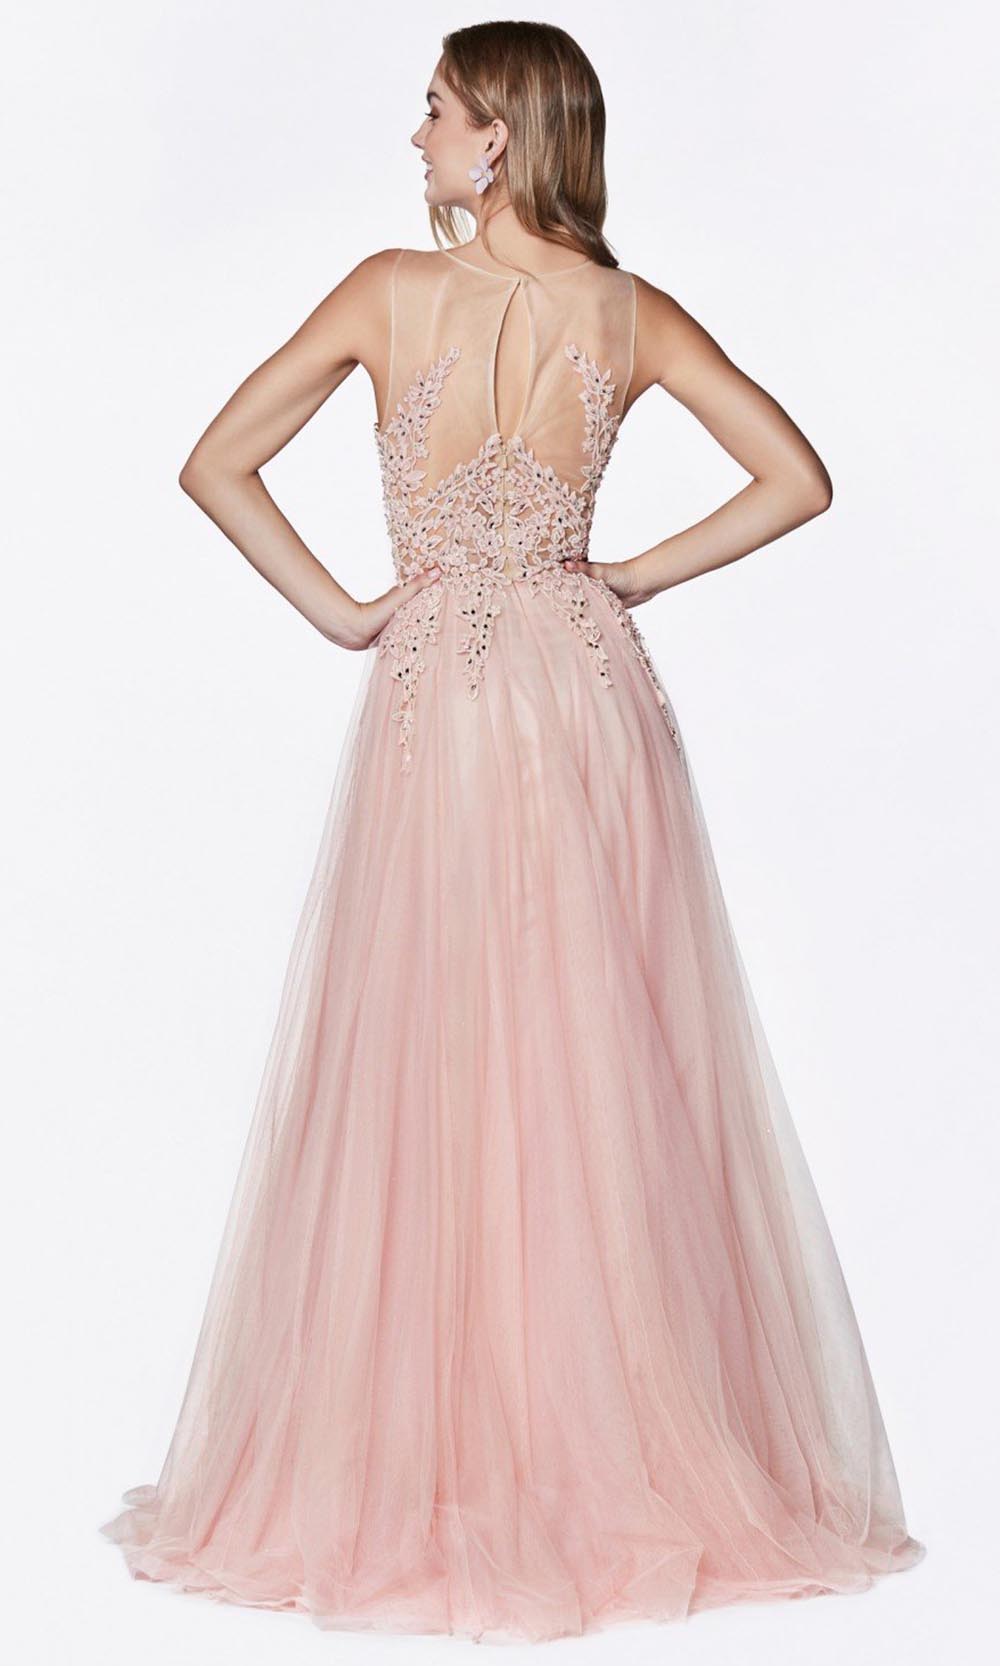 Cinderella Divine - CJ501 Jeweled Lace Tulle A-Line Dress In Pink